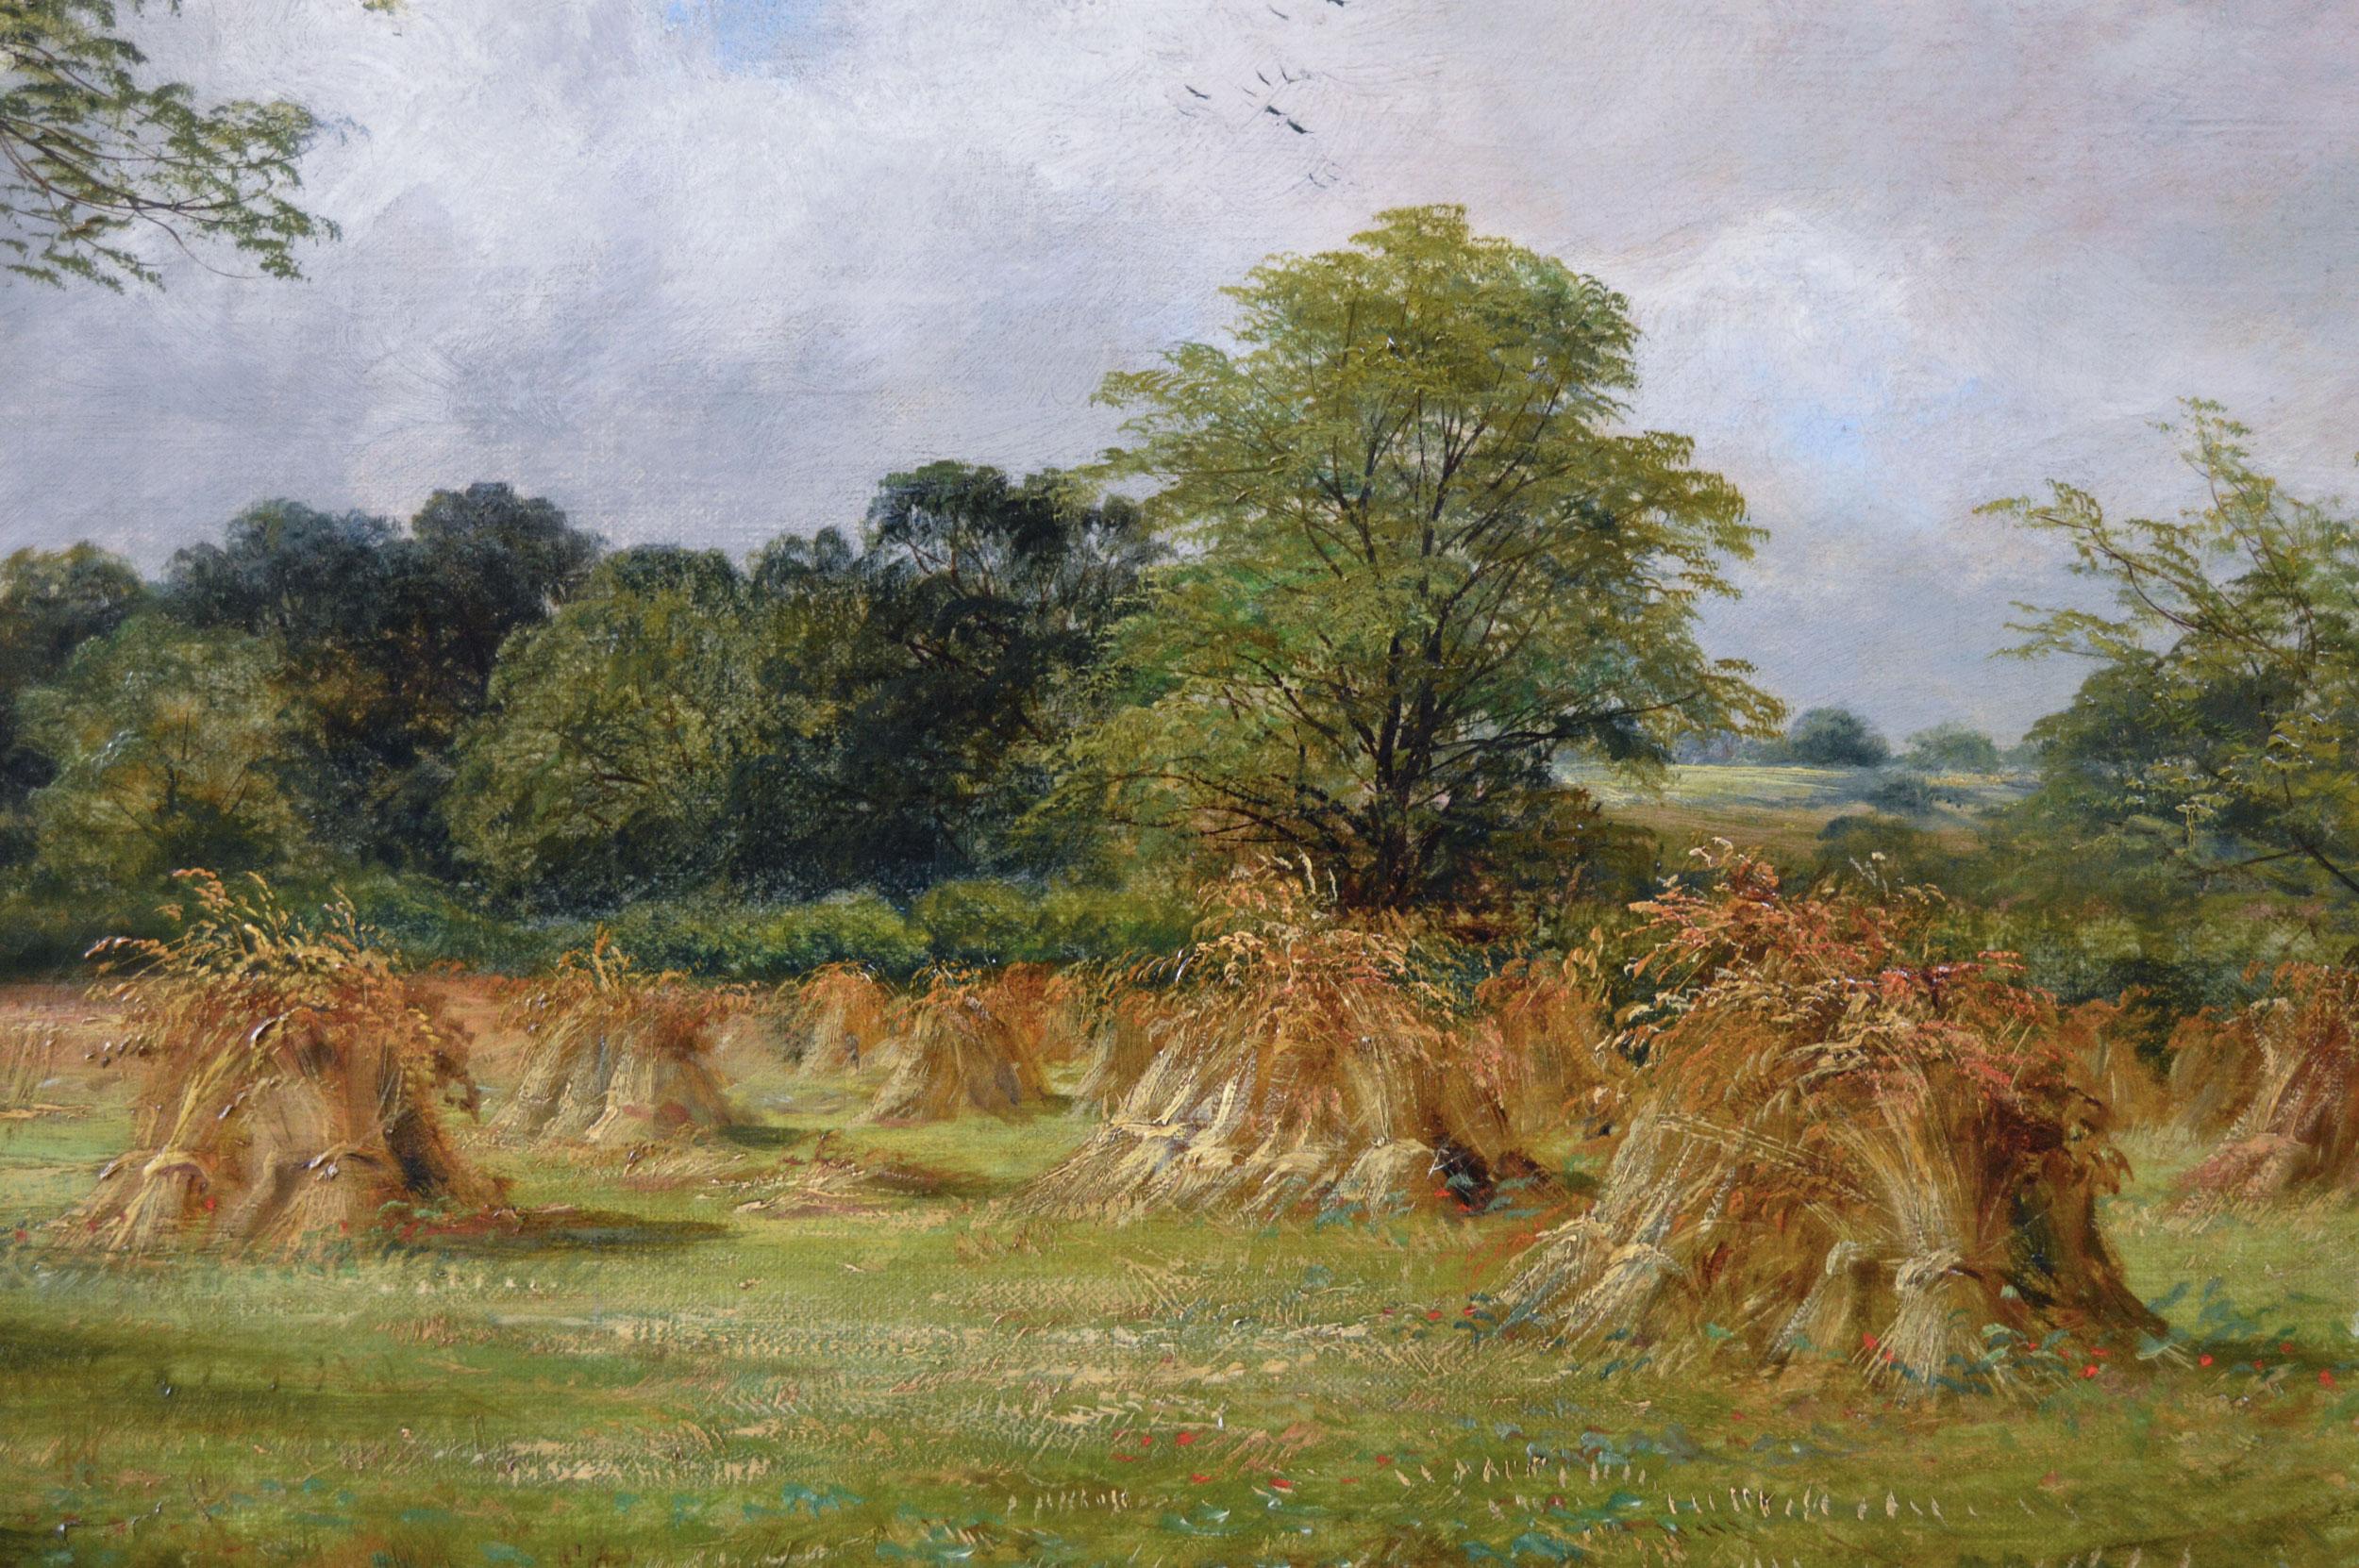 19th Century landscape oil painting of figures in a Cornfield - Brown Figurative Painting by David Payne